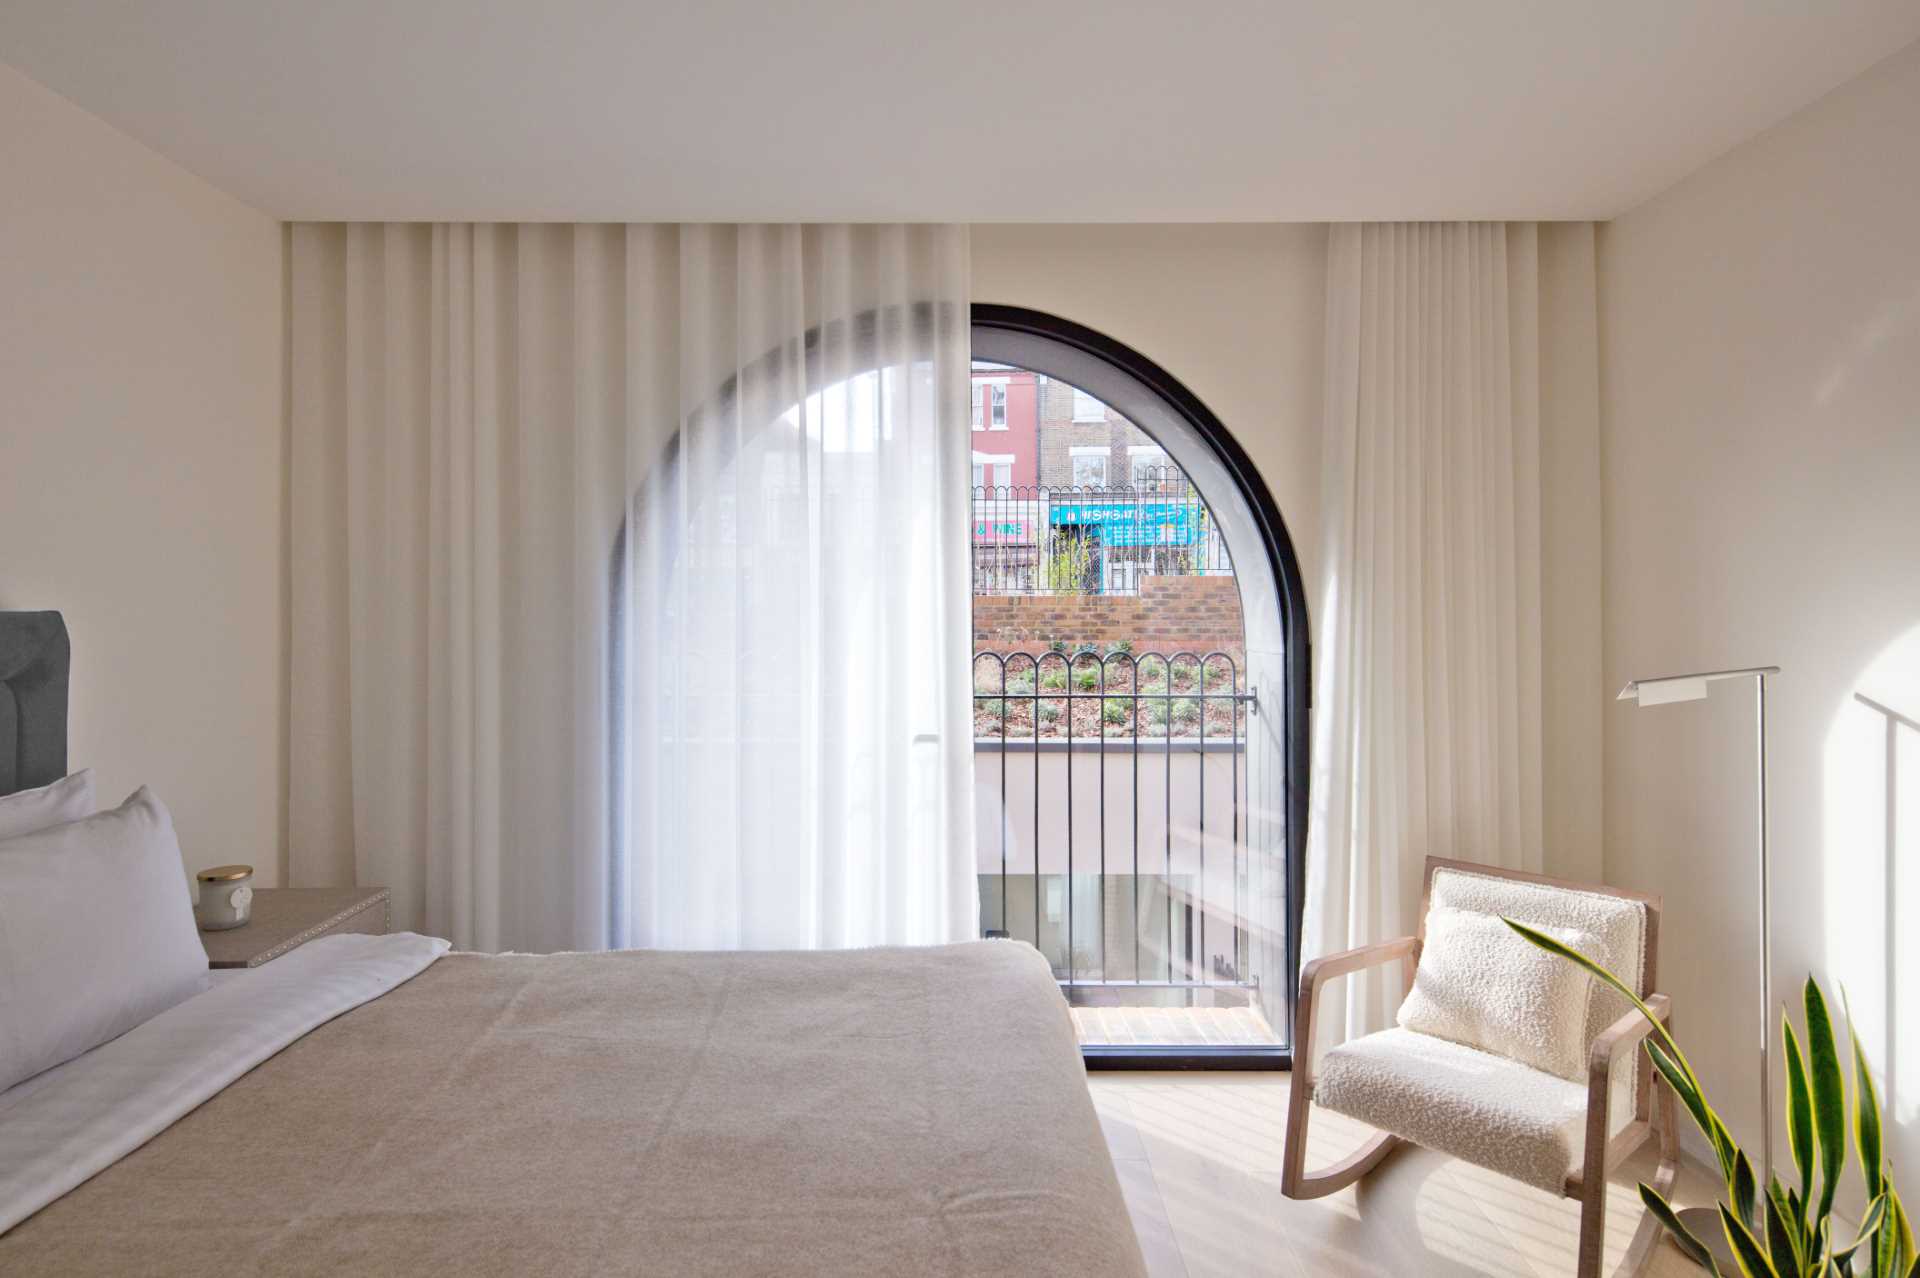 A modern bedroom with an arched window and floor-to-ceiling curtains.